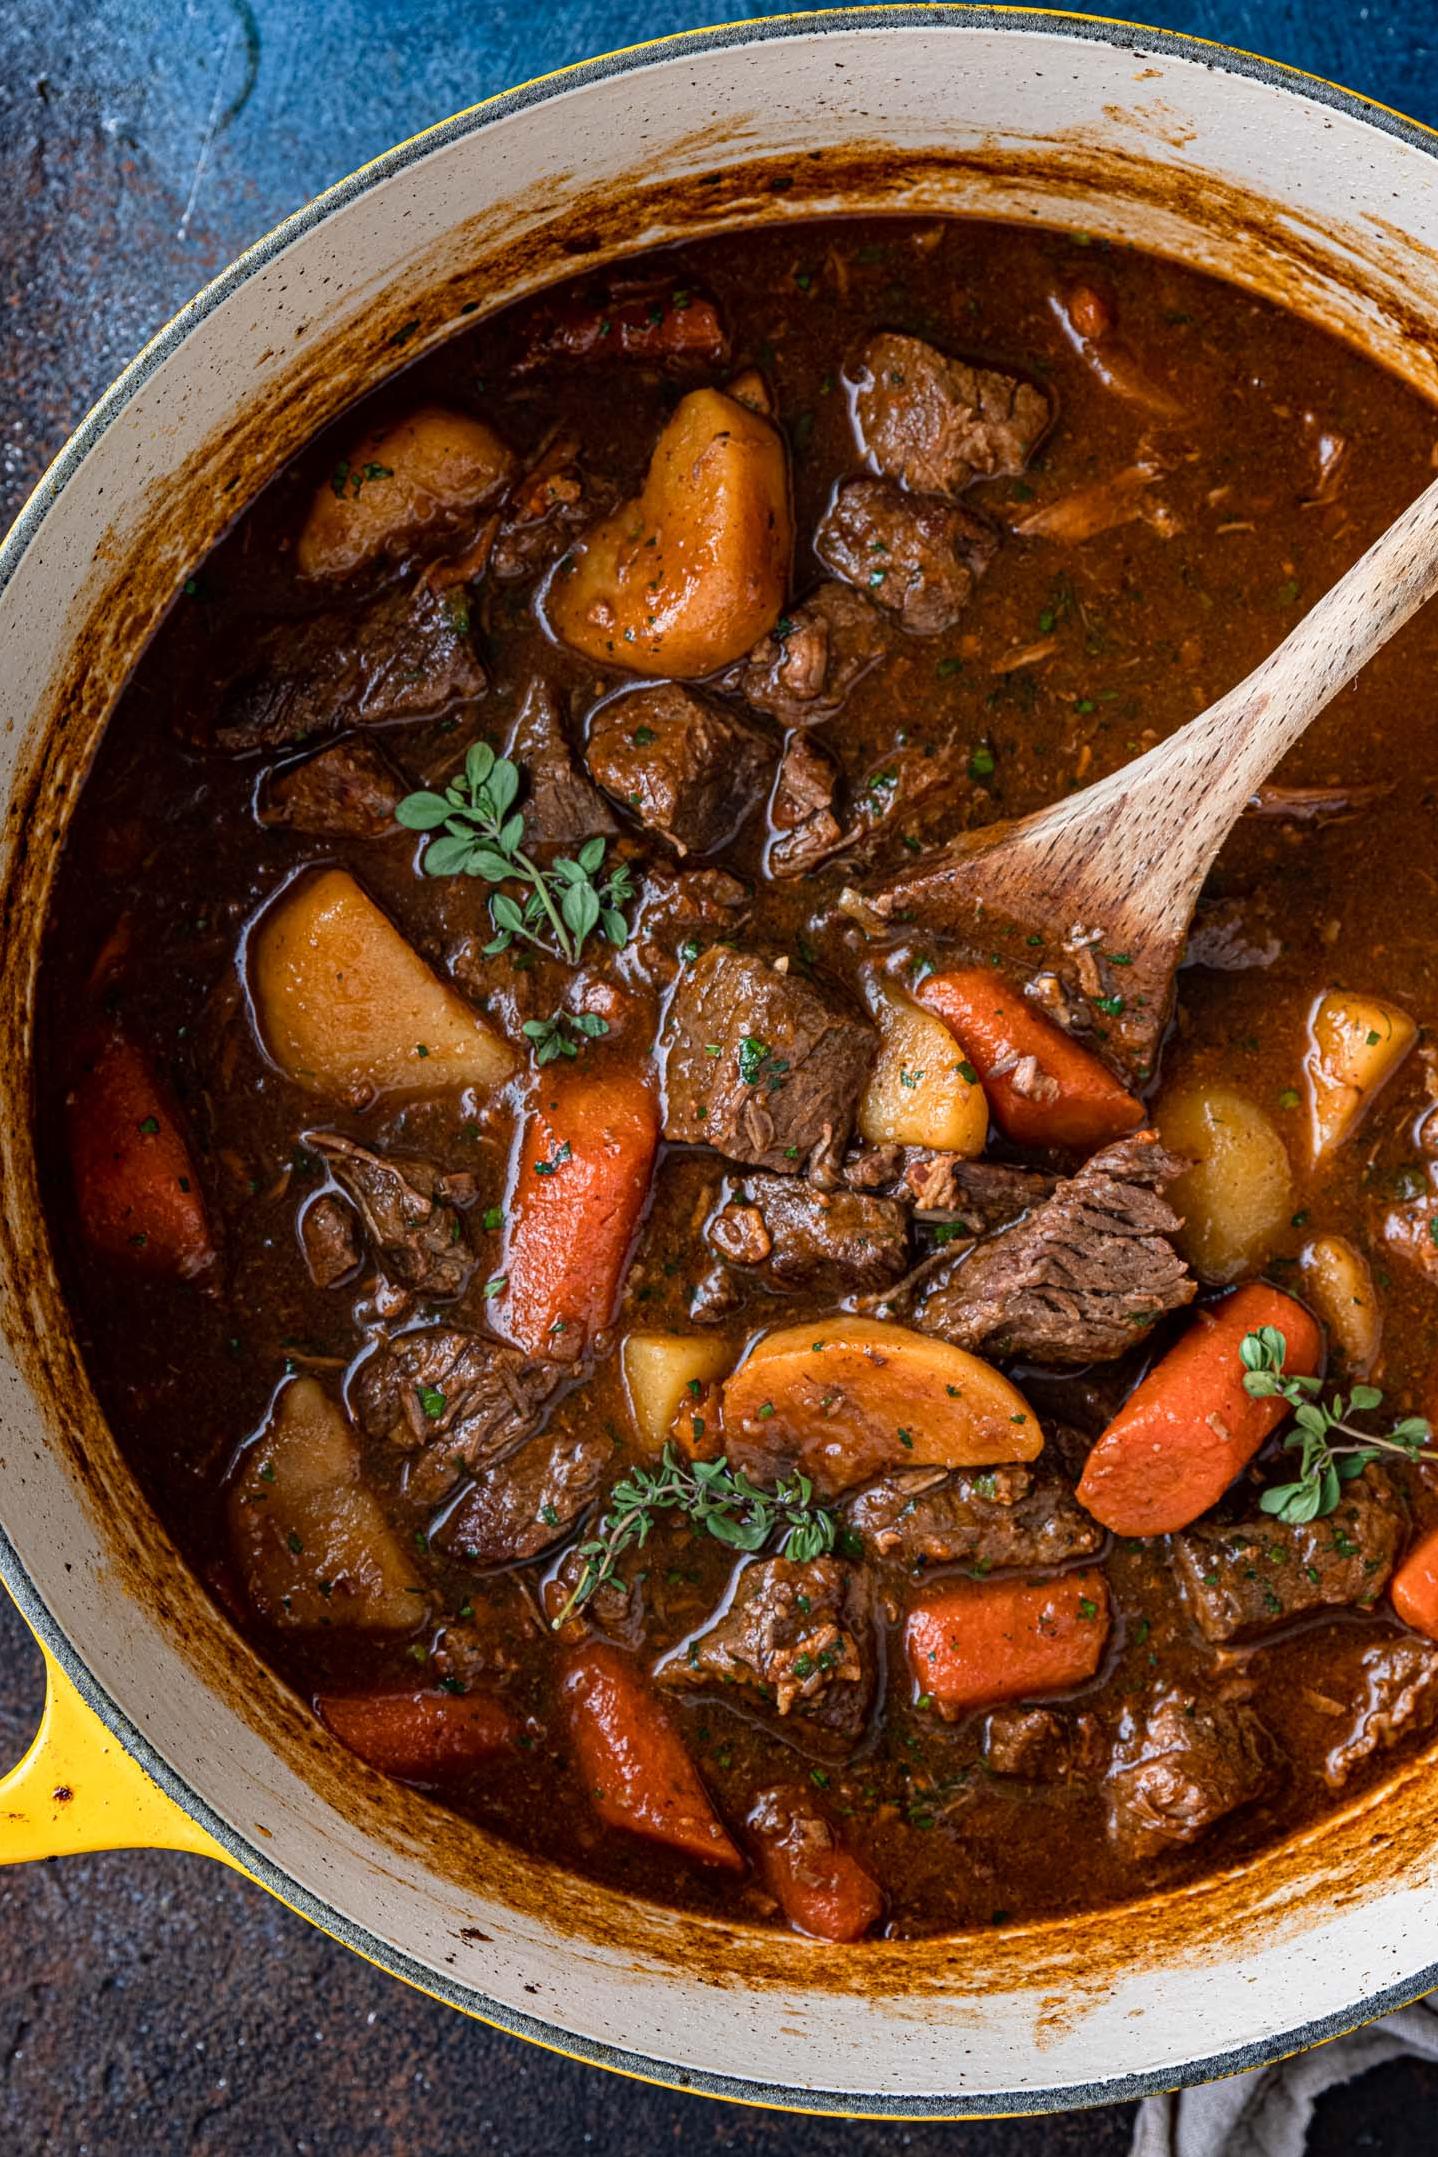  Dive into a comforting bowl of Irish Stout Beef Casserole!